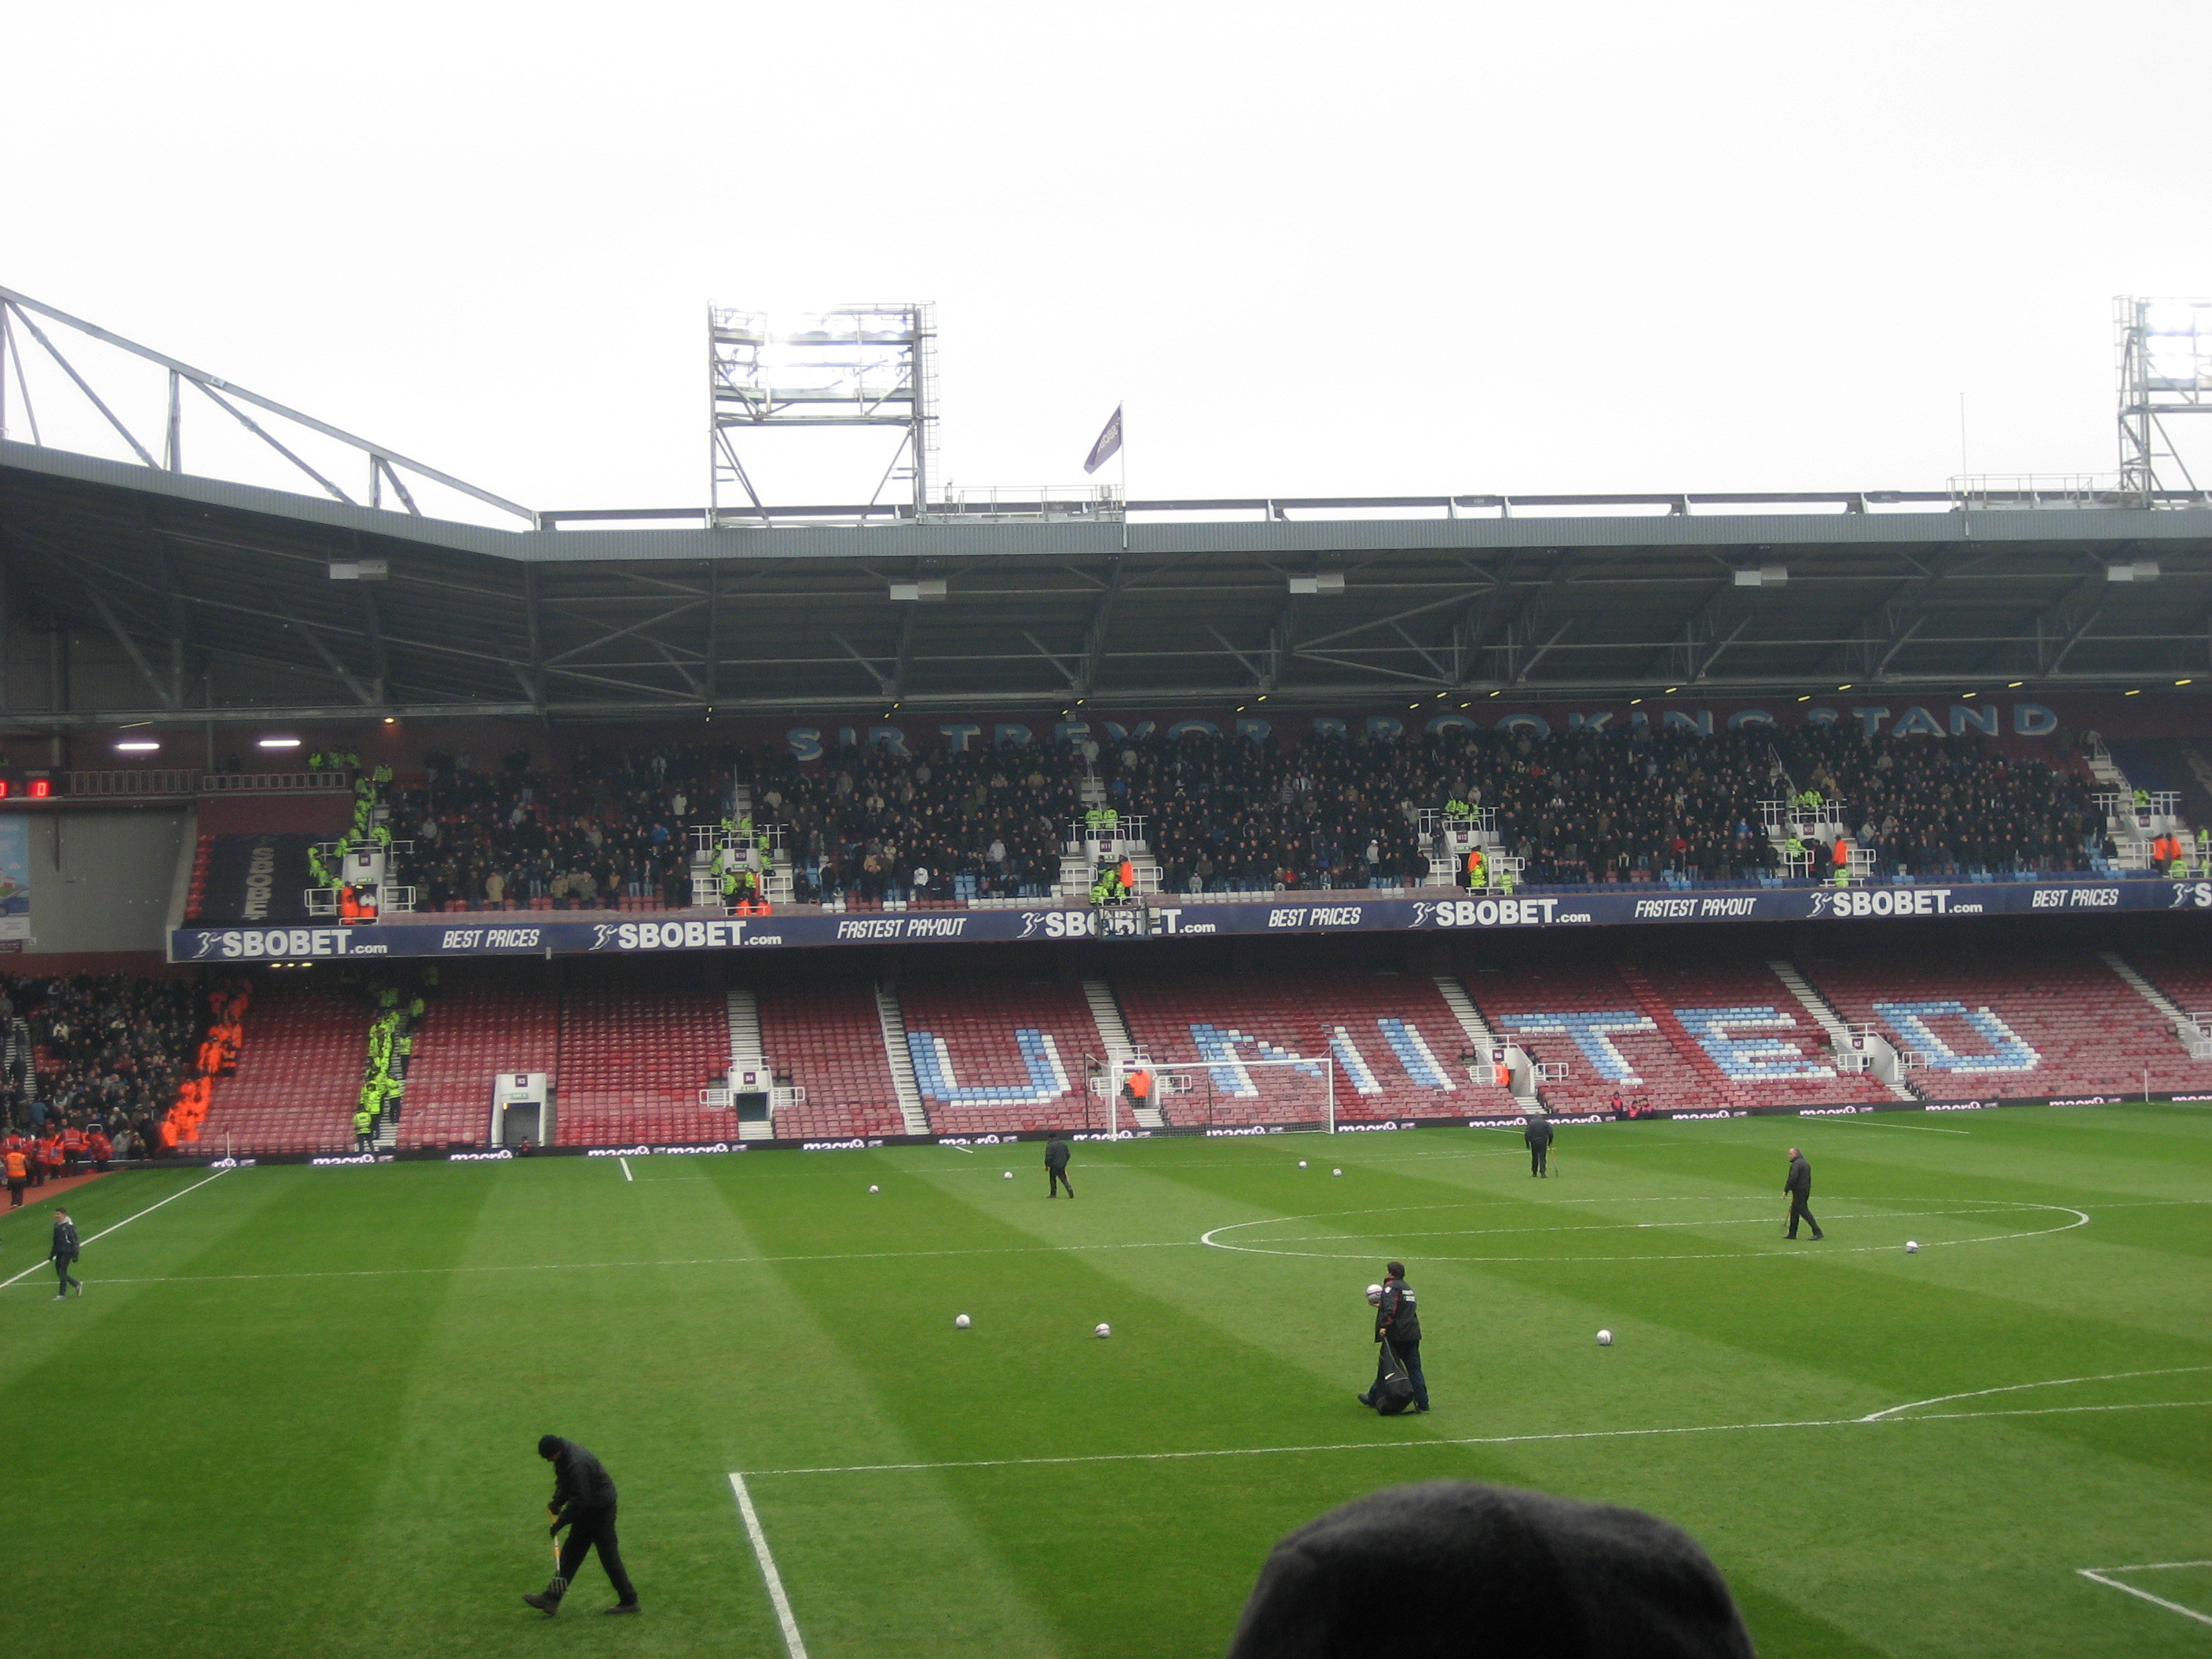 2816x2112 Millwall in the Sir Trevor Brooking Stand